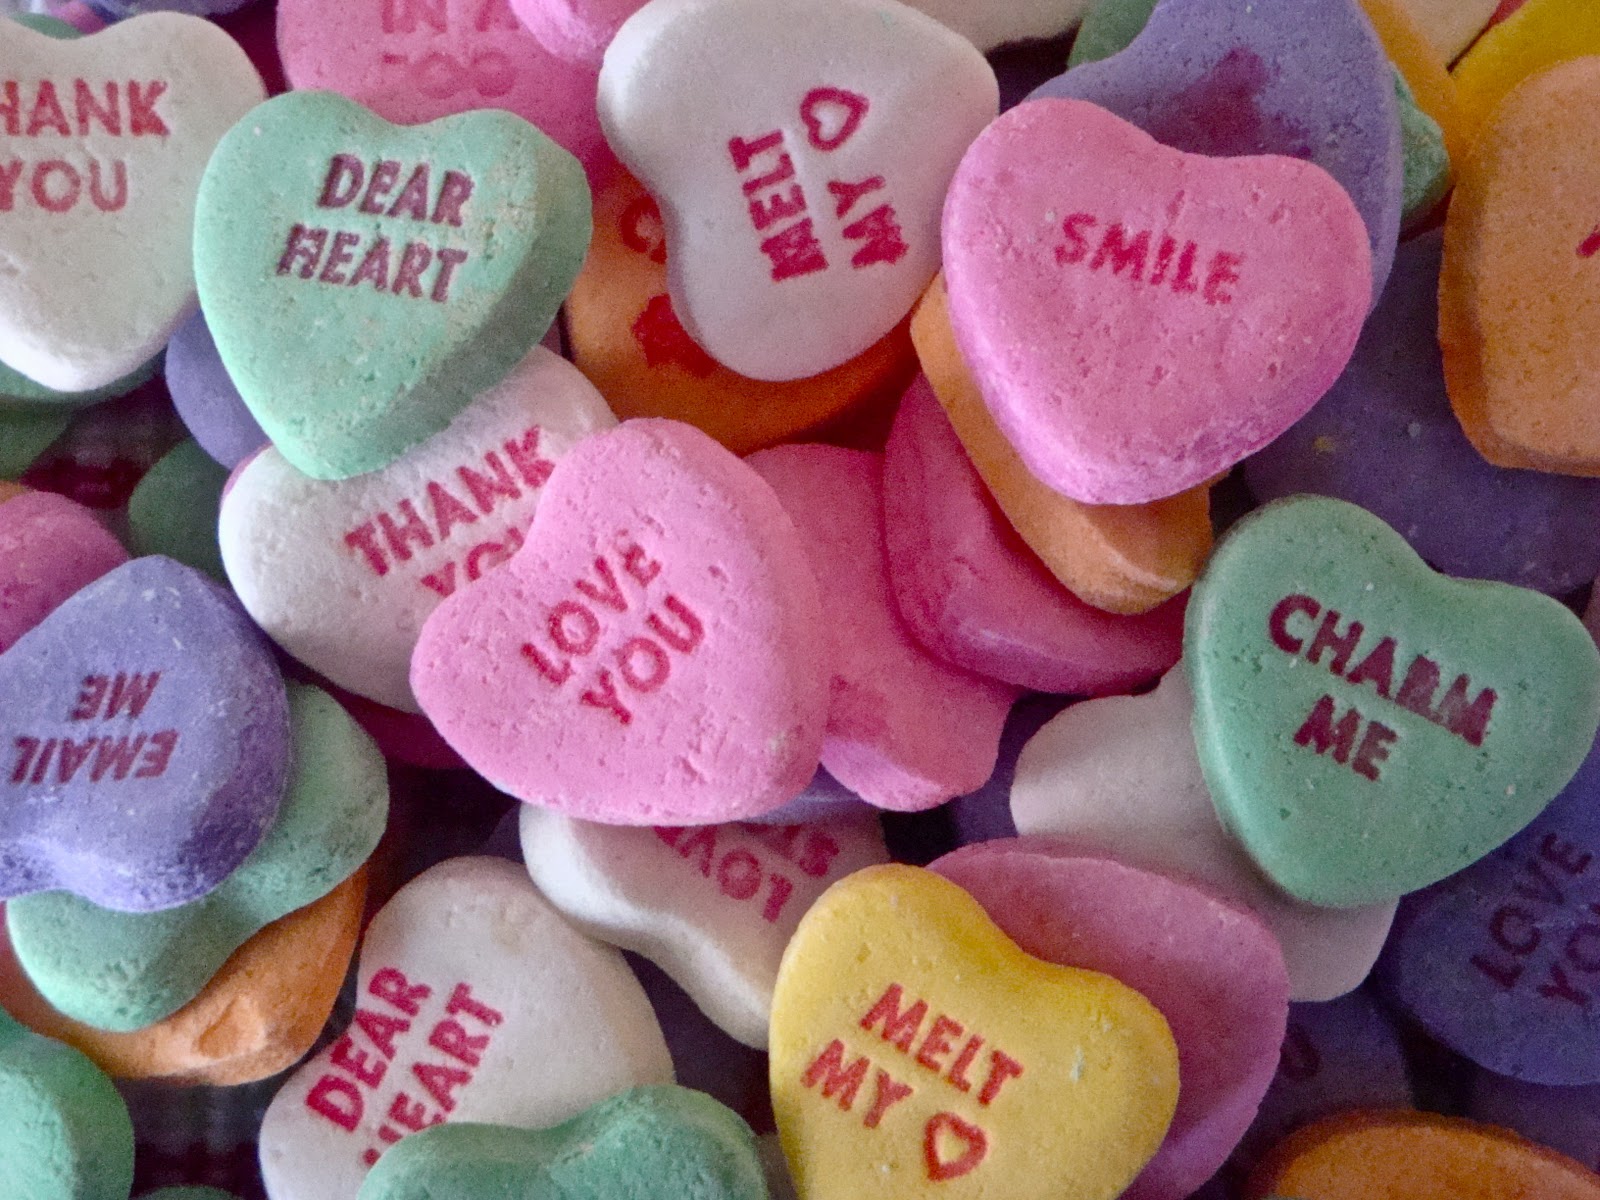 From Saintly Starts to Candy Hearts | Smart Girls Group